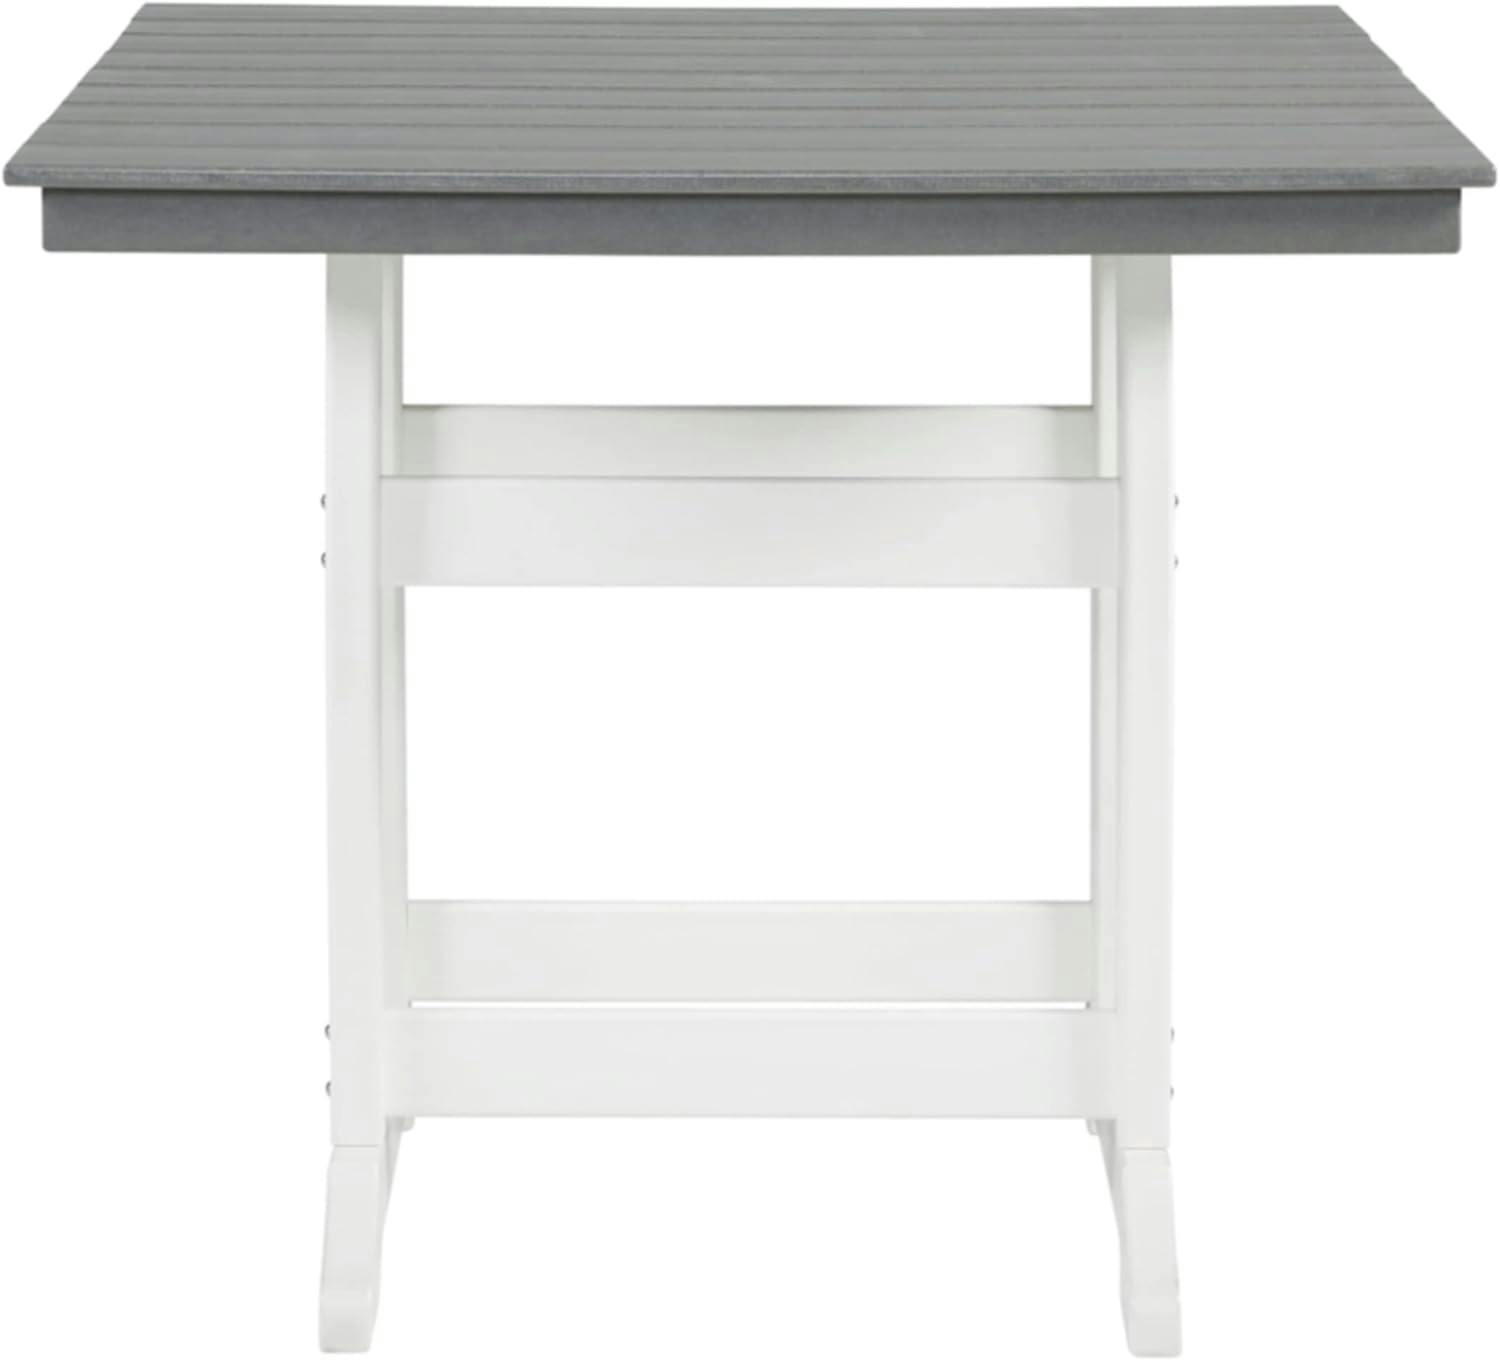 Transville 42" Two-Tone Gray and White Counter Height Outdoor Dining Table